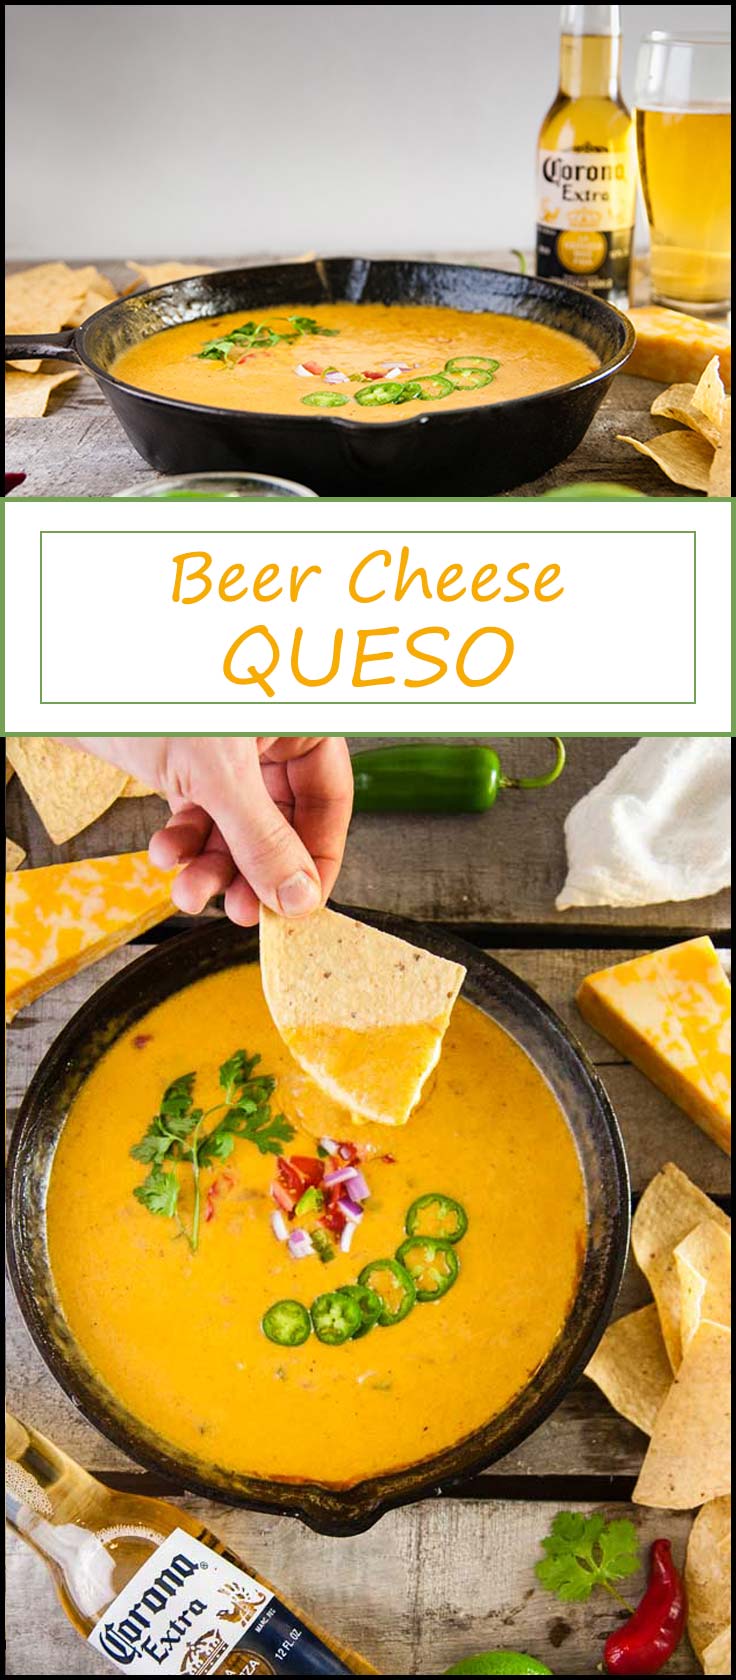 Easy recipe for beer cheese queso perfect for Cinco de Mayo, tailgating, or entertaining from www.seasonedsprinkles.com